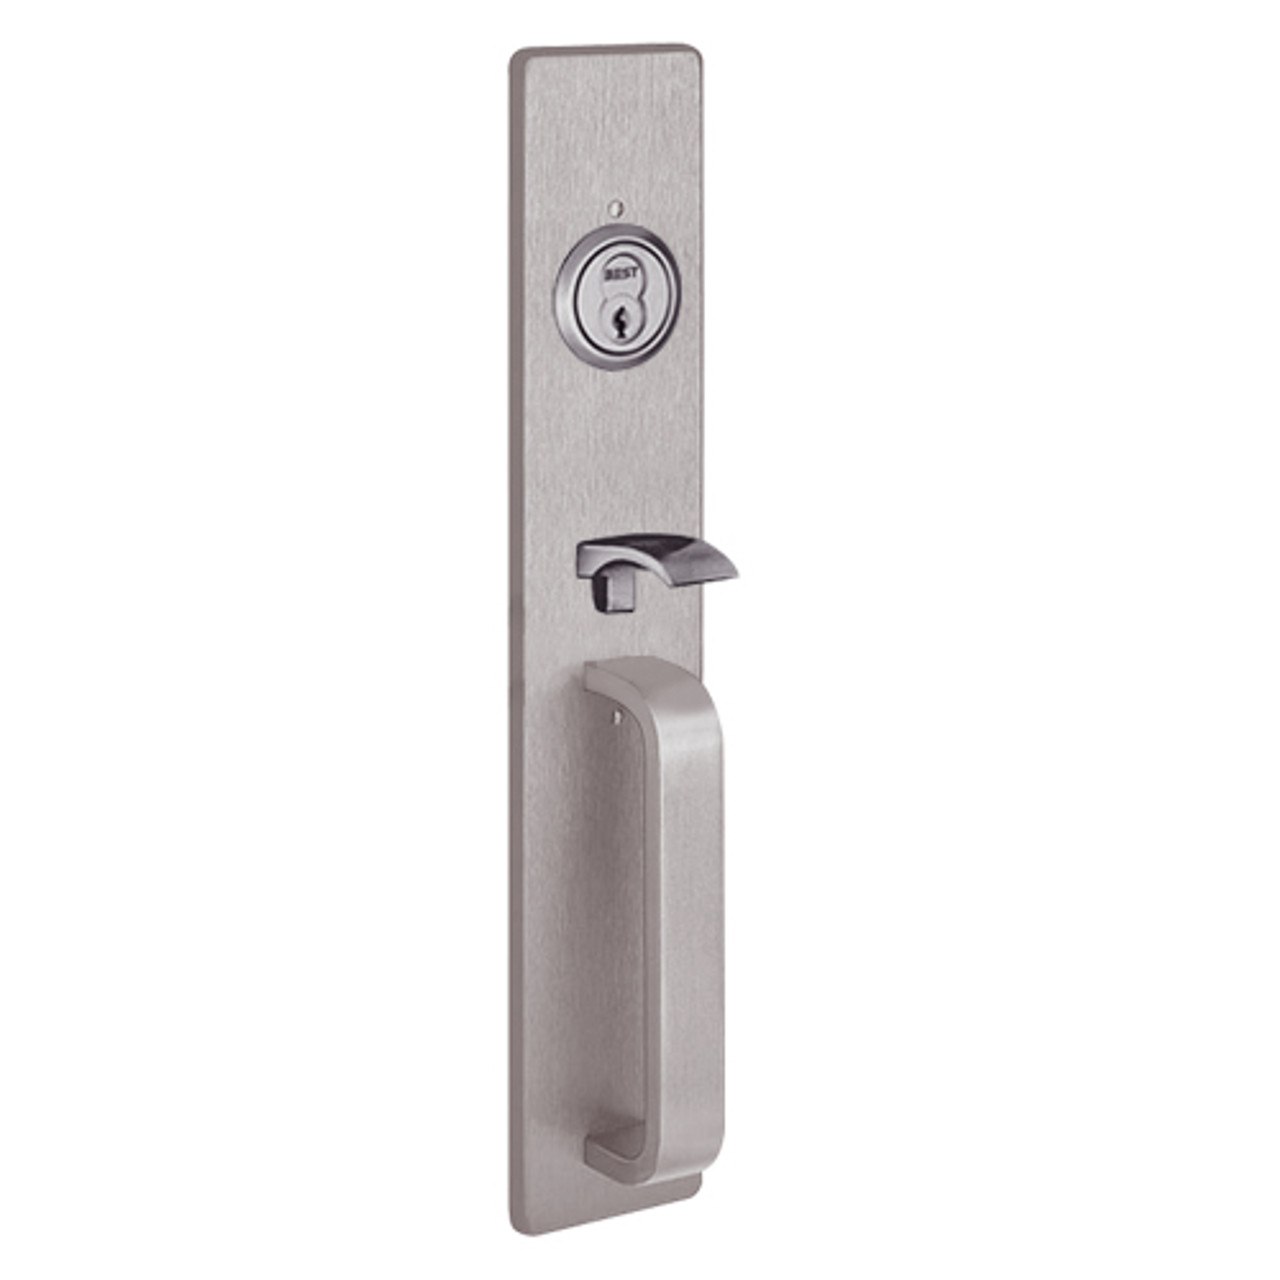 R1715A-630 PHI Thumb Piece Always Active Retrofit Trim with A Design Pull for Apex and Olympian Series Exit Device in Satin Stainless Steel Finish